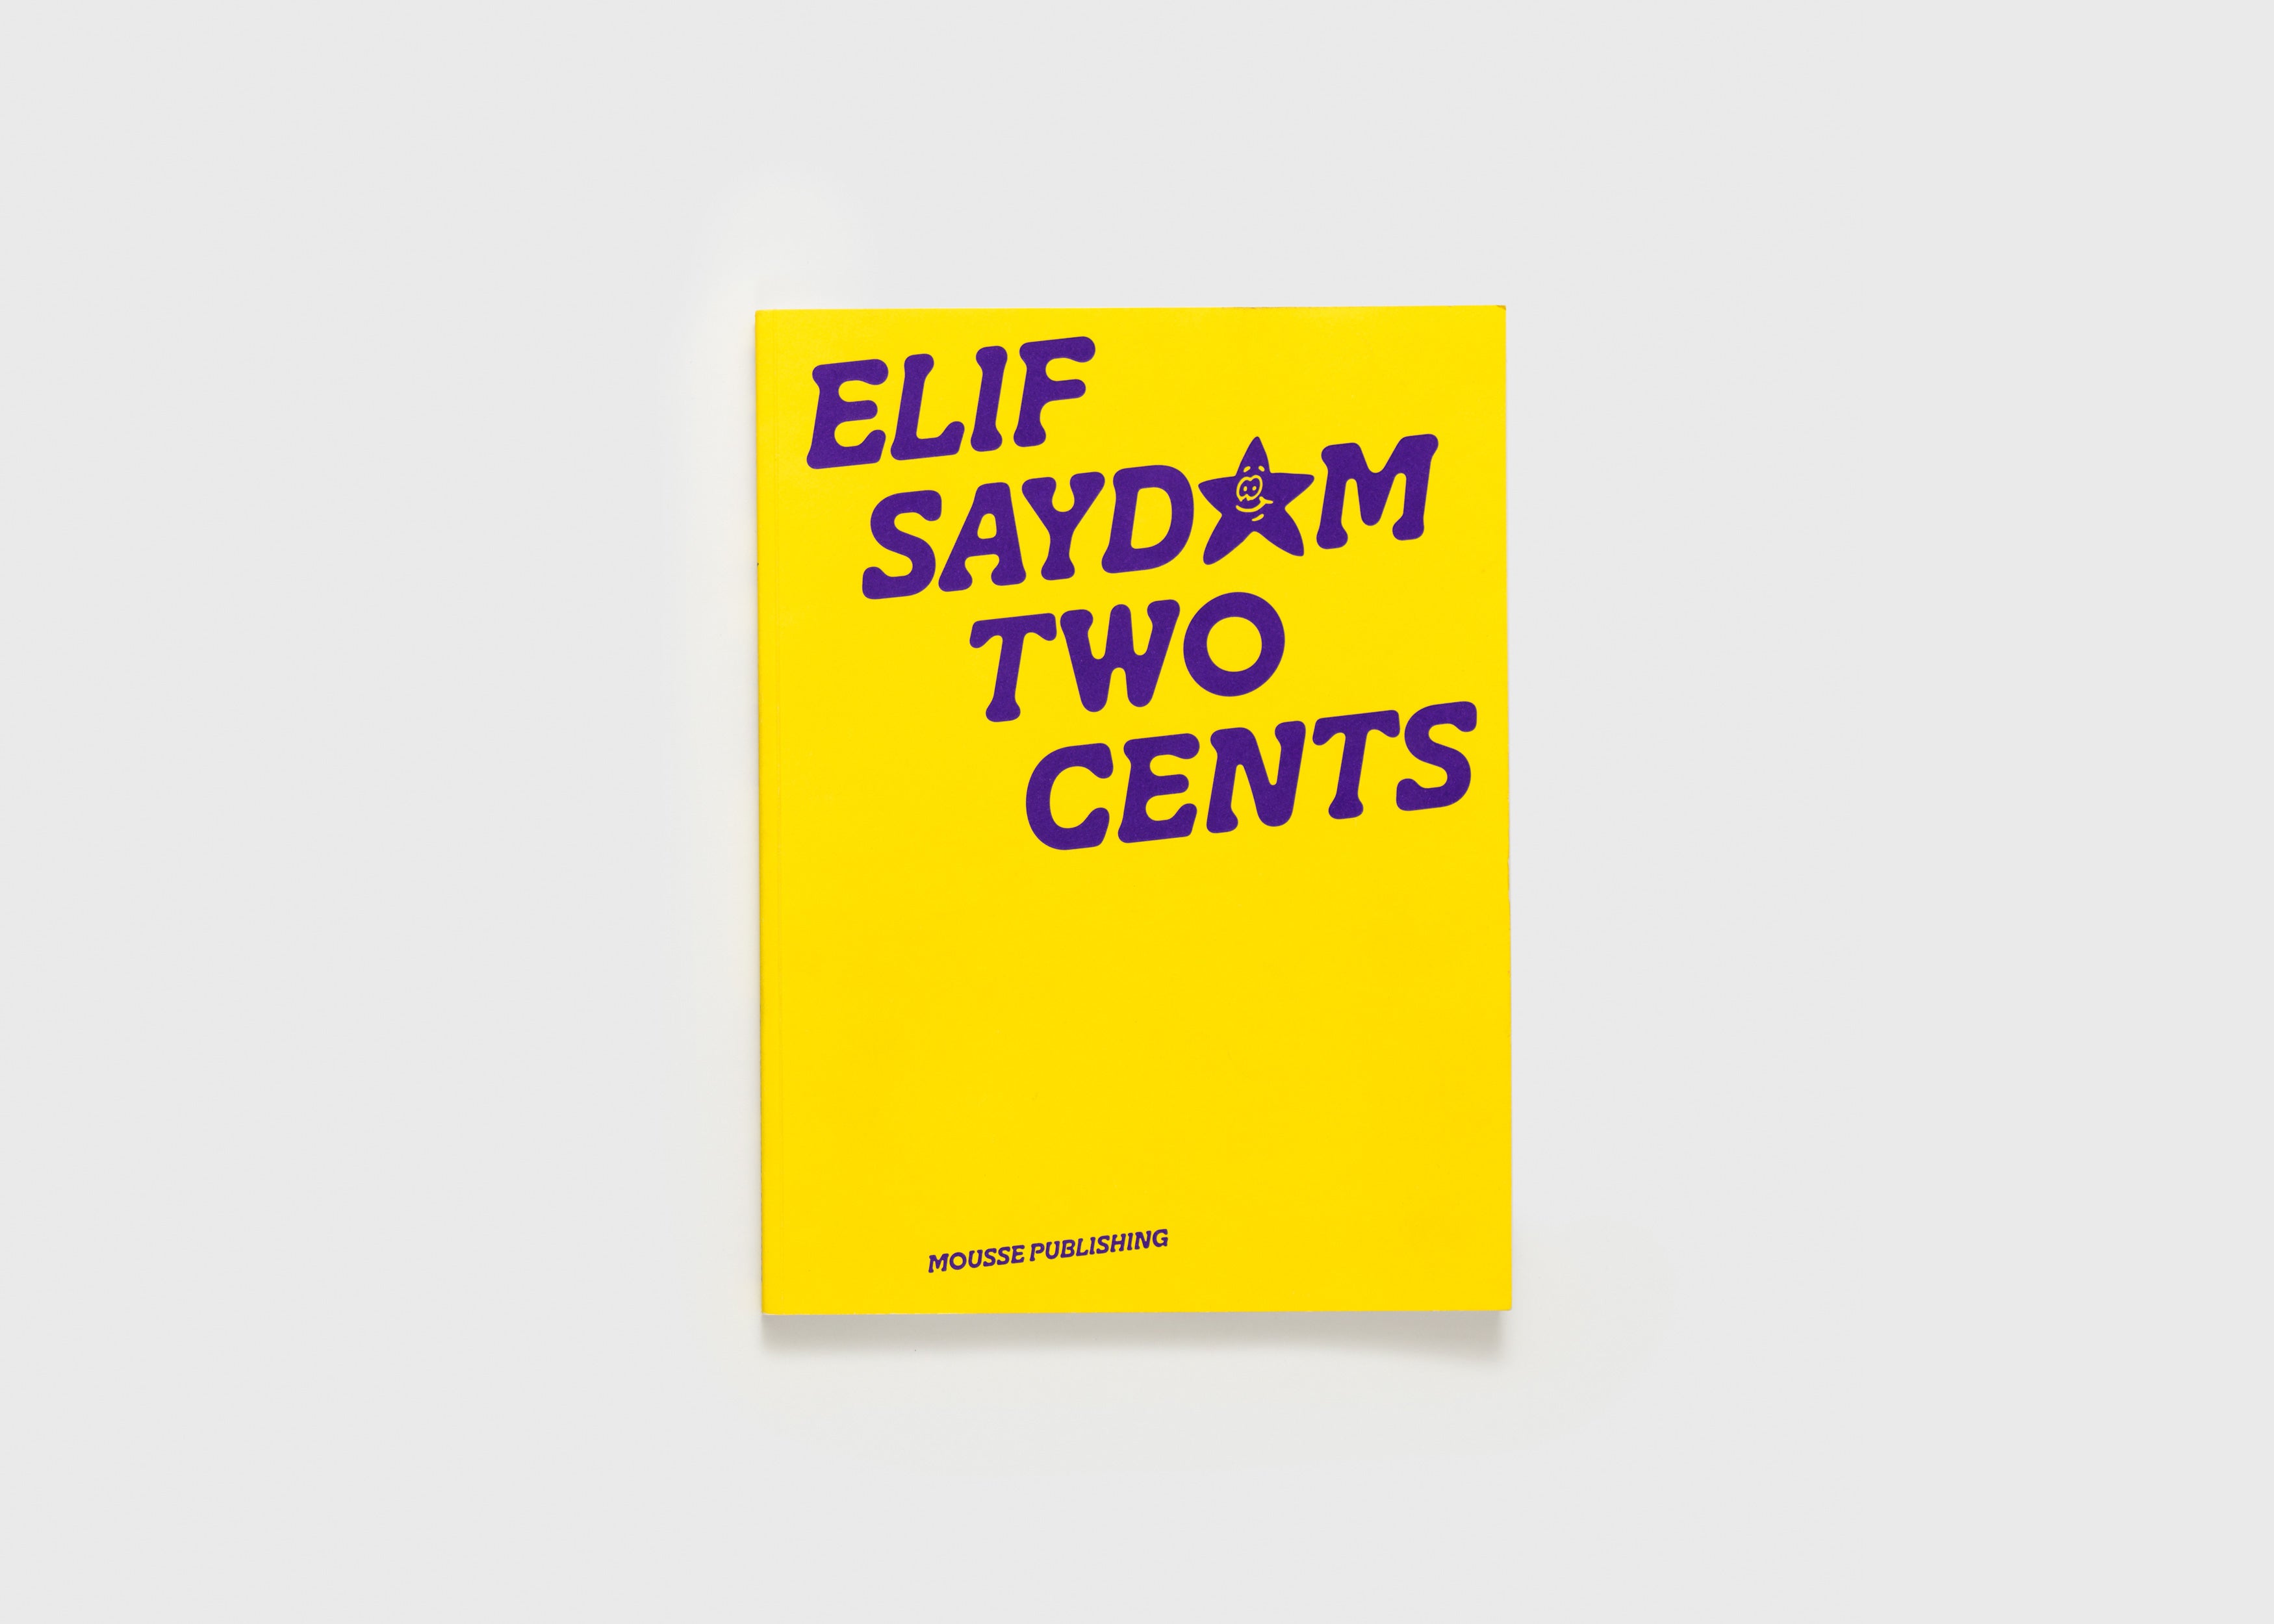 Elif Saydam, ‘TWO CENTS’